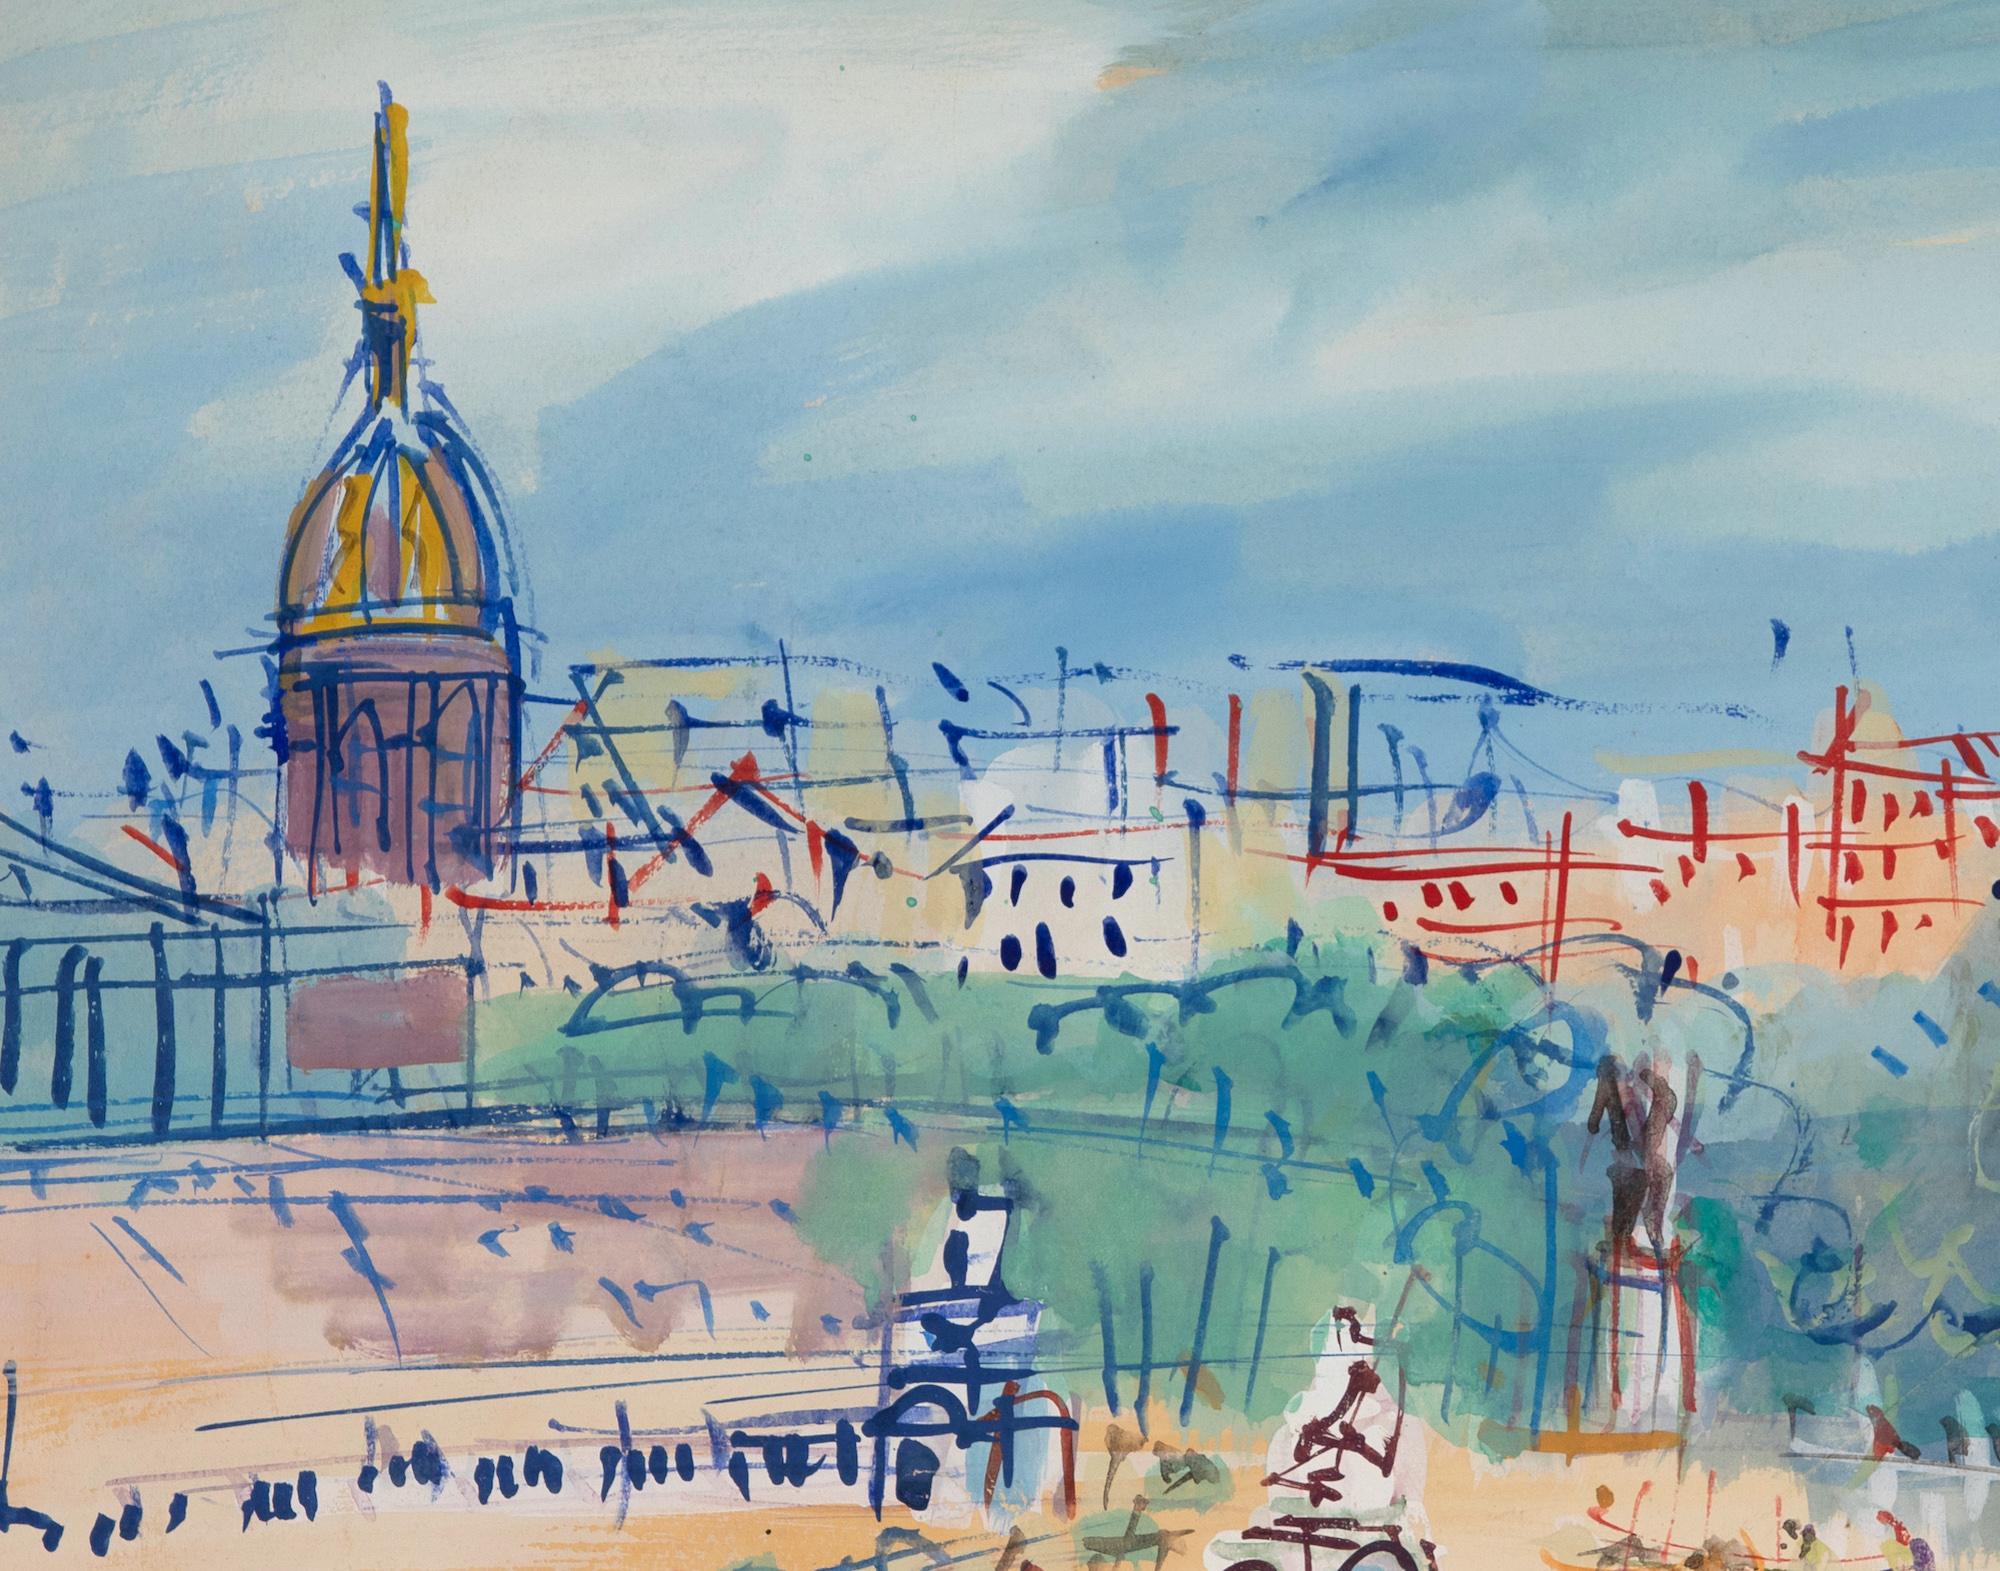 *UK BUYERS WILL PAY AN ADDITIONAL 5% IMPORT DUTY ON TOP OF THE ABOVE PRICE

Place de la Concorde by Jean Dufy (1888-1964)
Gouache and watercolour on paper
48.6 x 63.2 cm (19 ¹/₈ x 24 ⁷/₈ inches)
Signed lower right, Jean Dufy
Executed circa